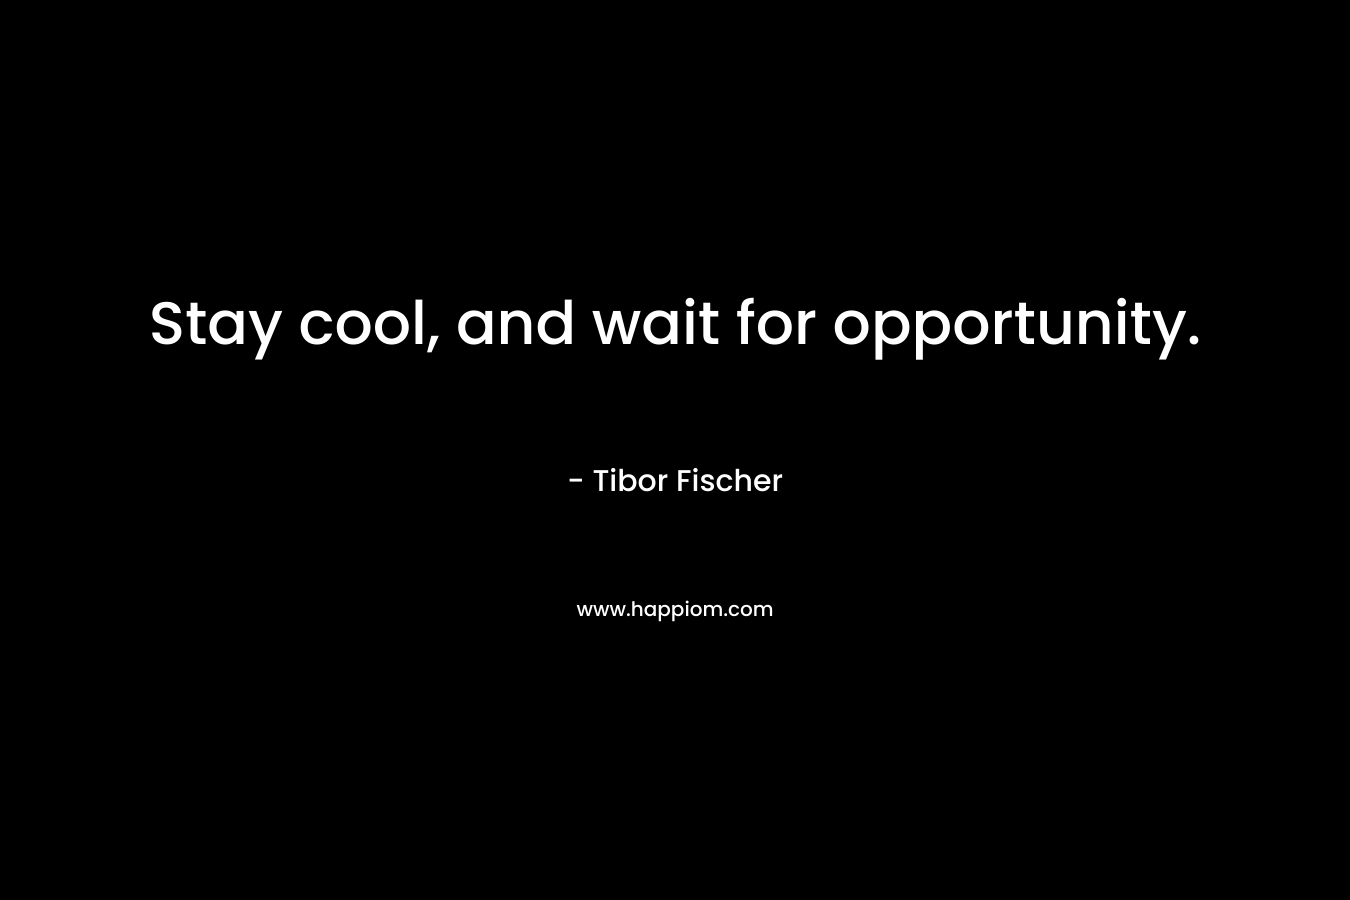 Stay cool, and wait for opportunity.